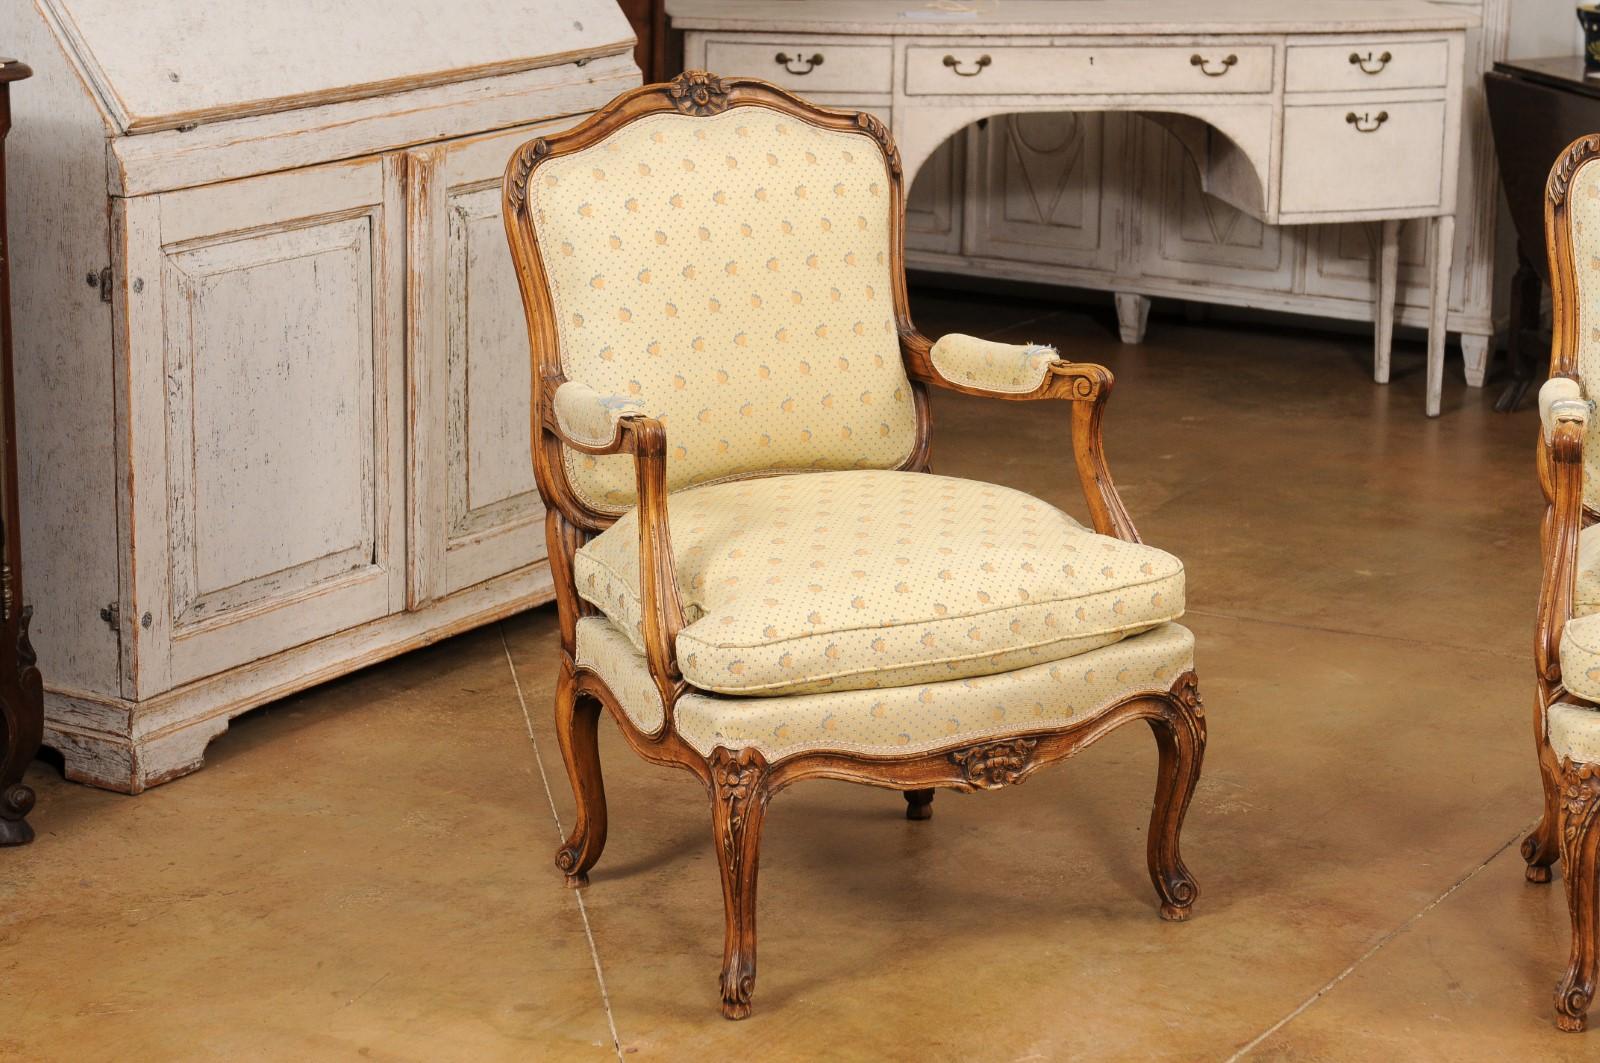 Louis XV Style French Walnut Fauteuils à la Reine with Carved Floral Motifs  In Good Condition For Sale In Atlanta, GA